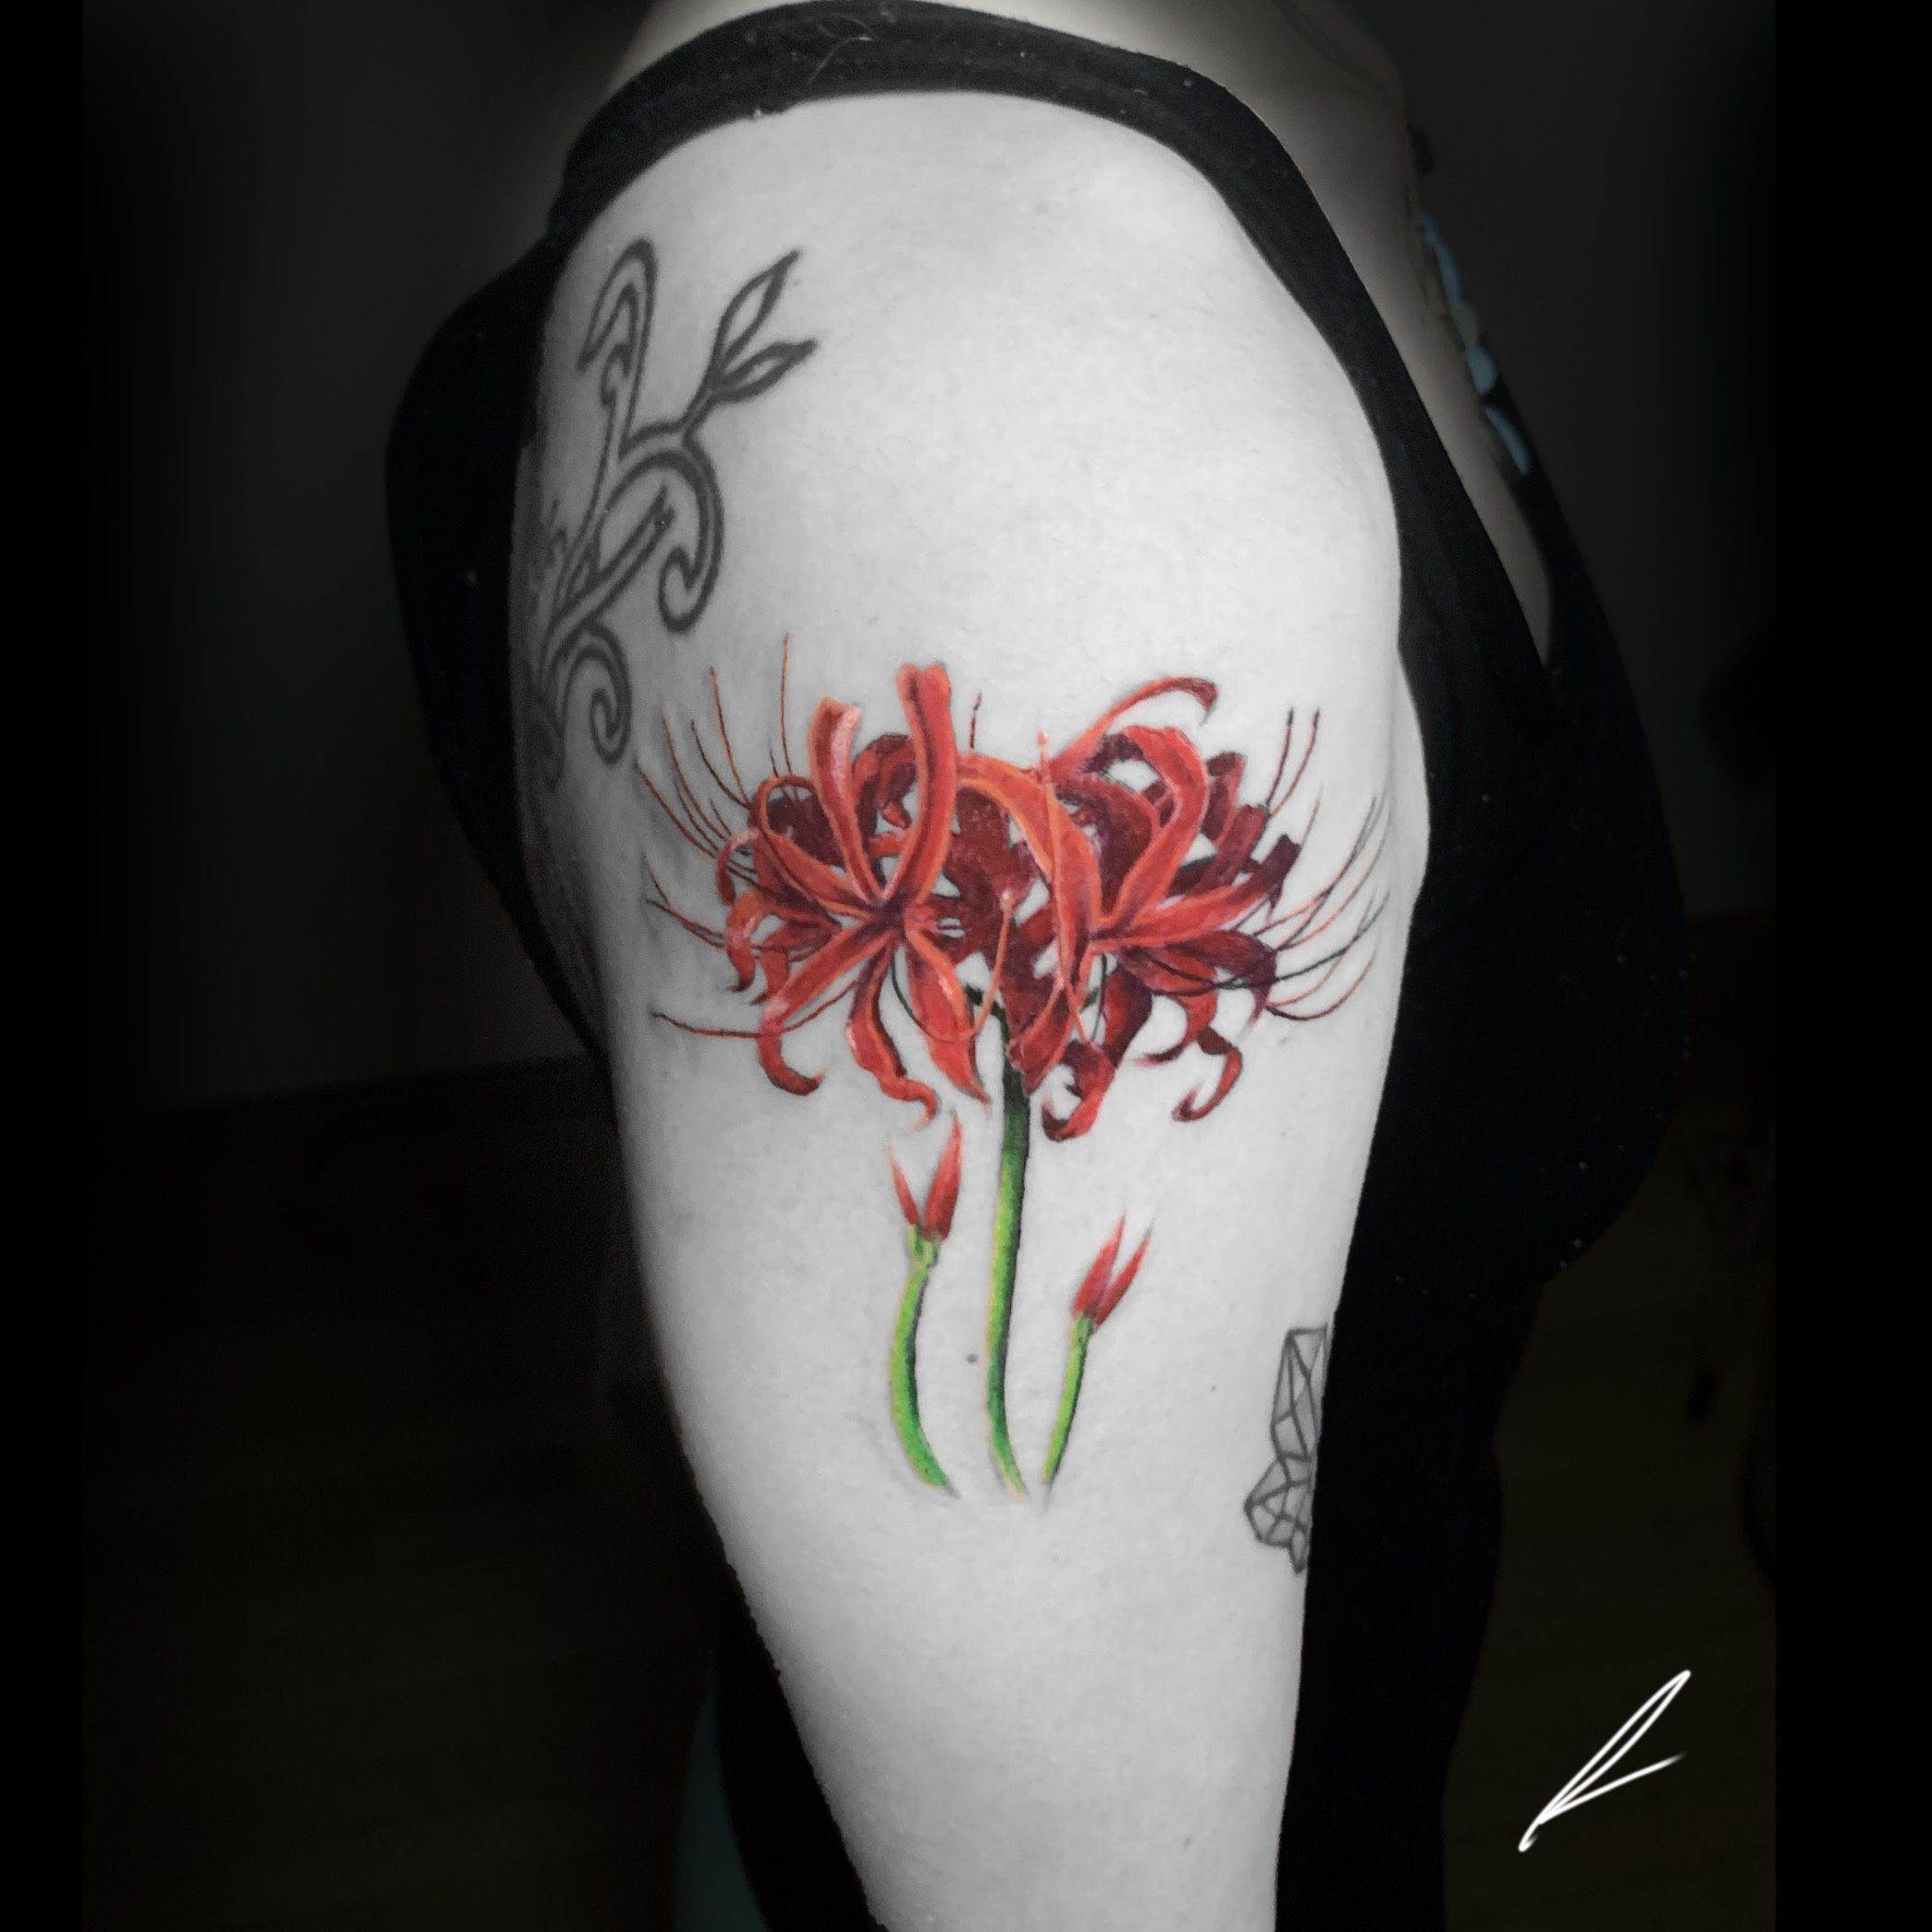 CRDNG Tattoo  Kanji and red spider lily tattoo  Thank you for trusting  CRDNGtattoo tokyoghoul anime  Facebook